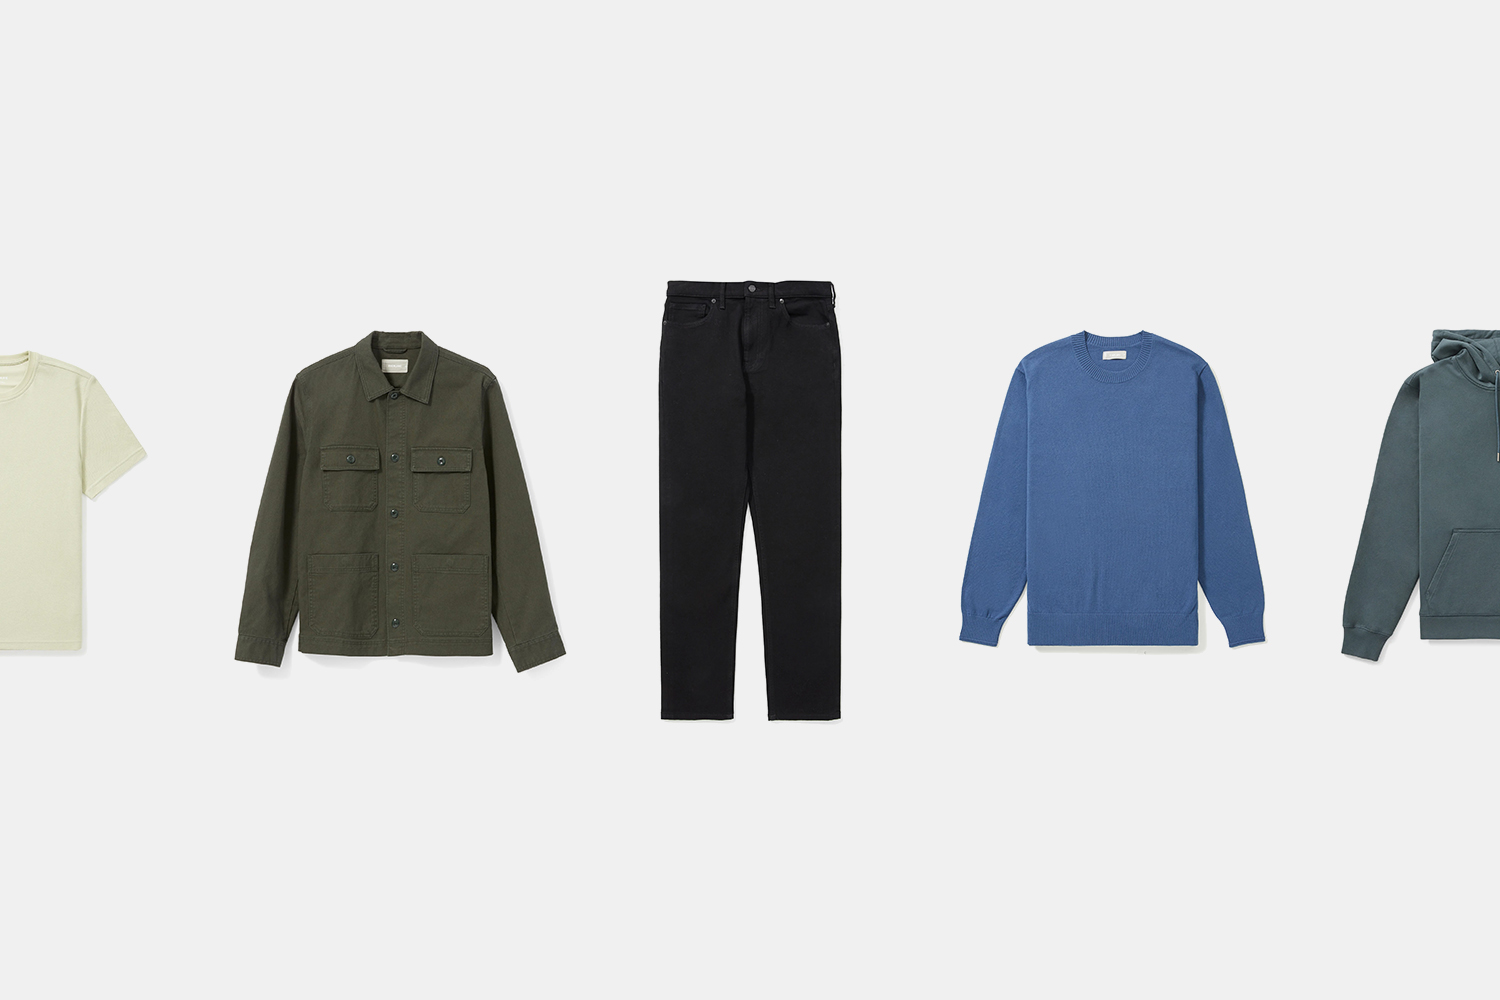 Deal: Everlane Just Put Its Entire Site on Sale